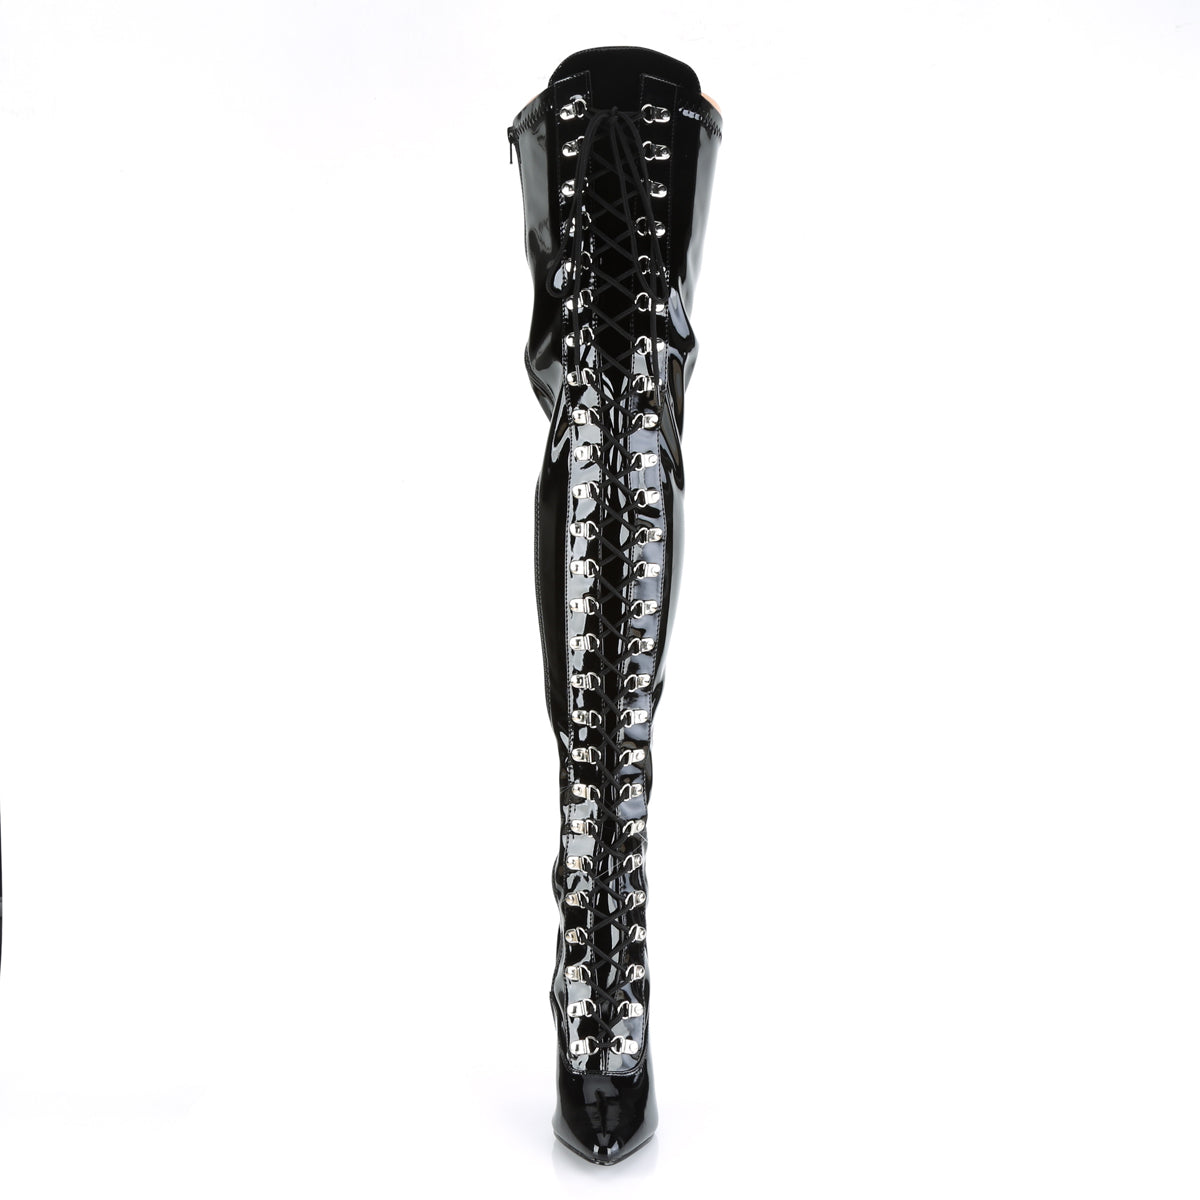 SEDUCE-3024/B 5" PLEASER FAST DELIVERY 24-48h